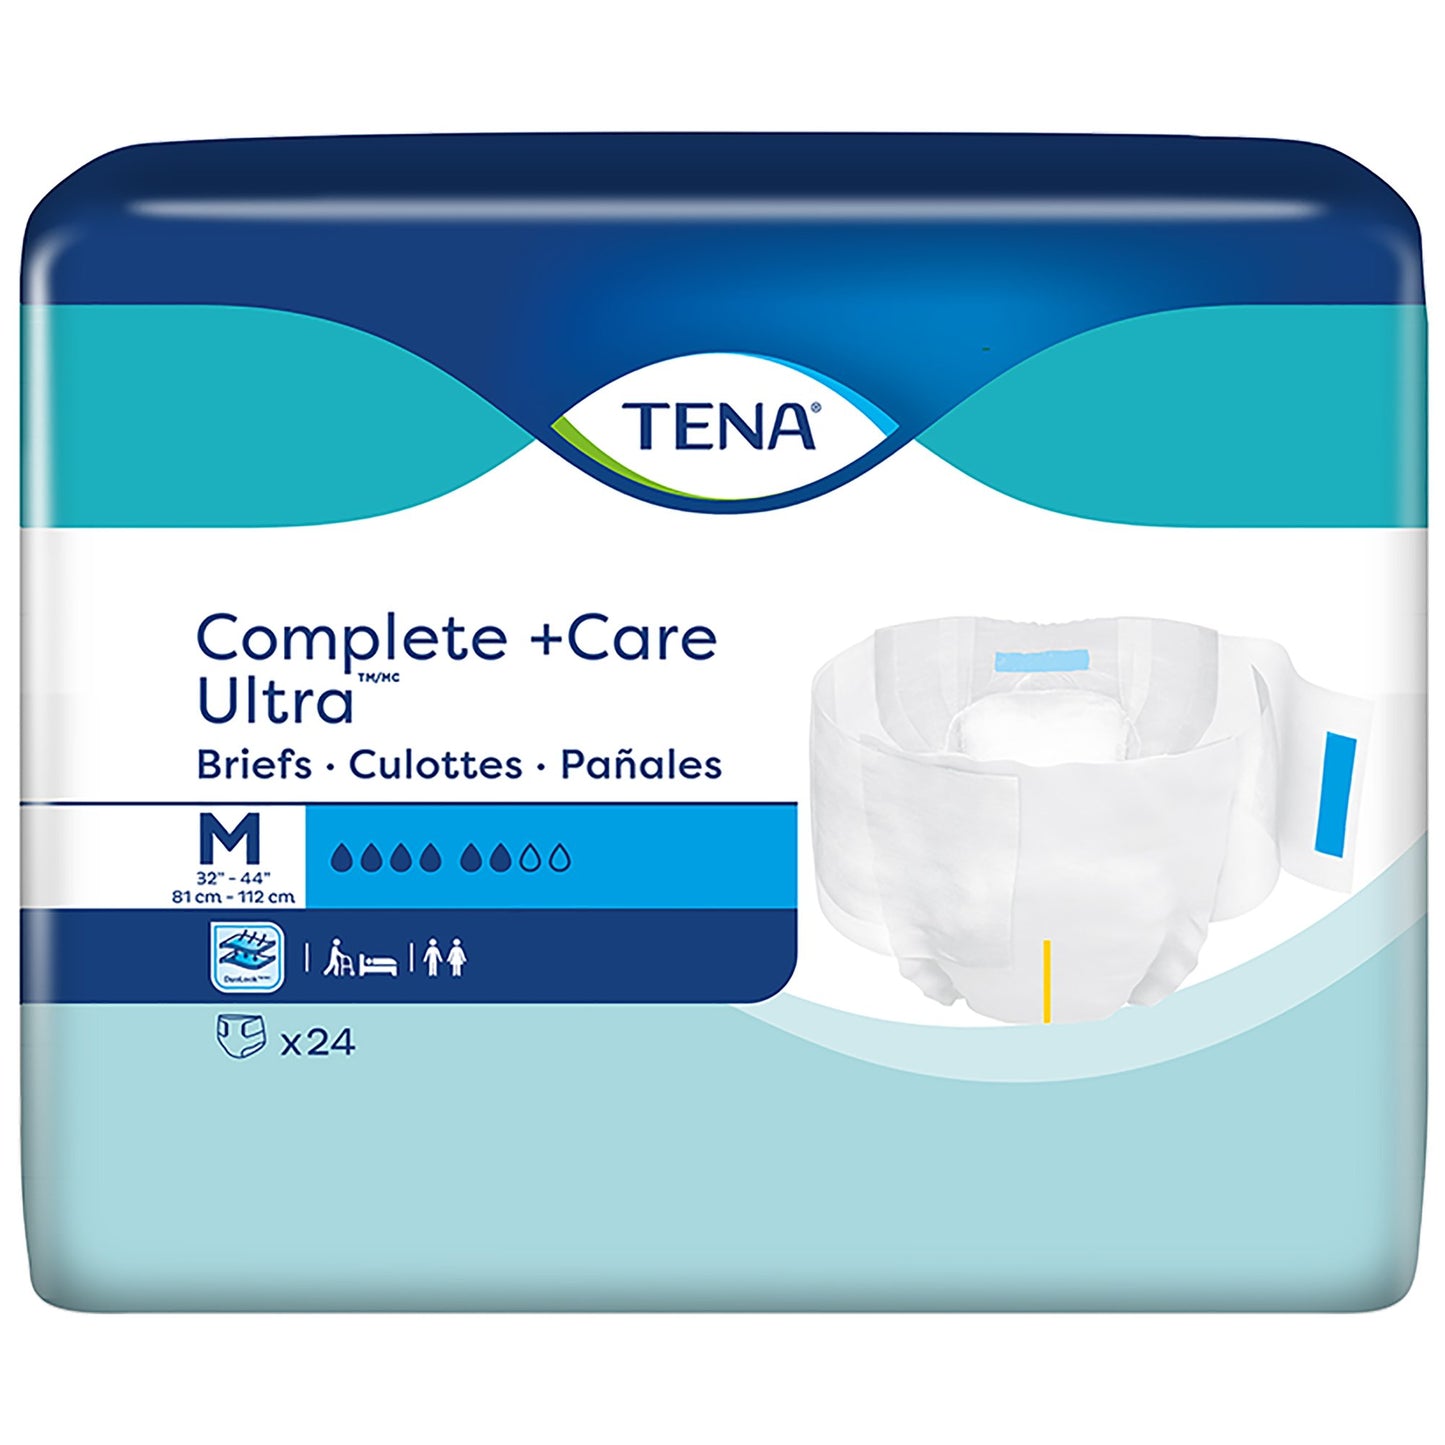 Unisex Adult Incontinence Brief TENA Complete + Care Ultra Medium Disposable Moderate Absorbency